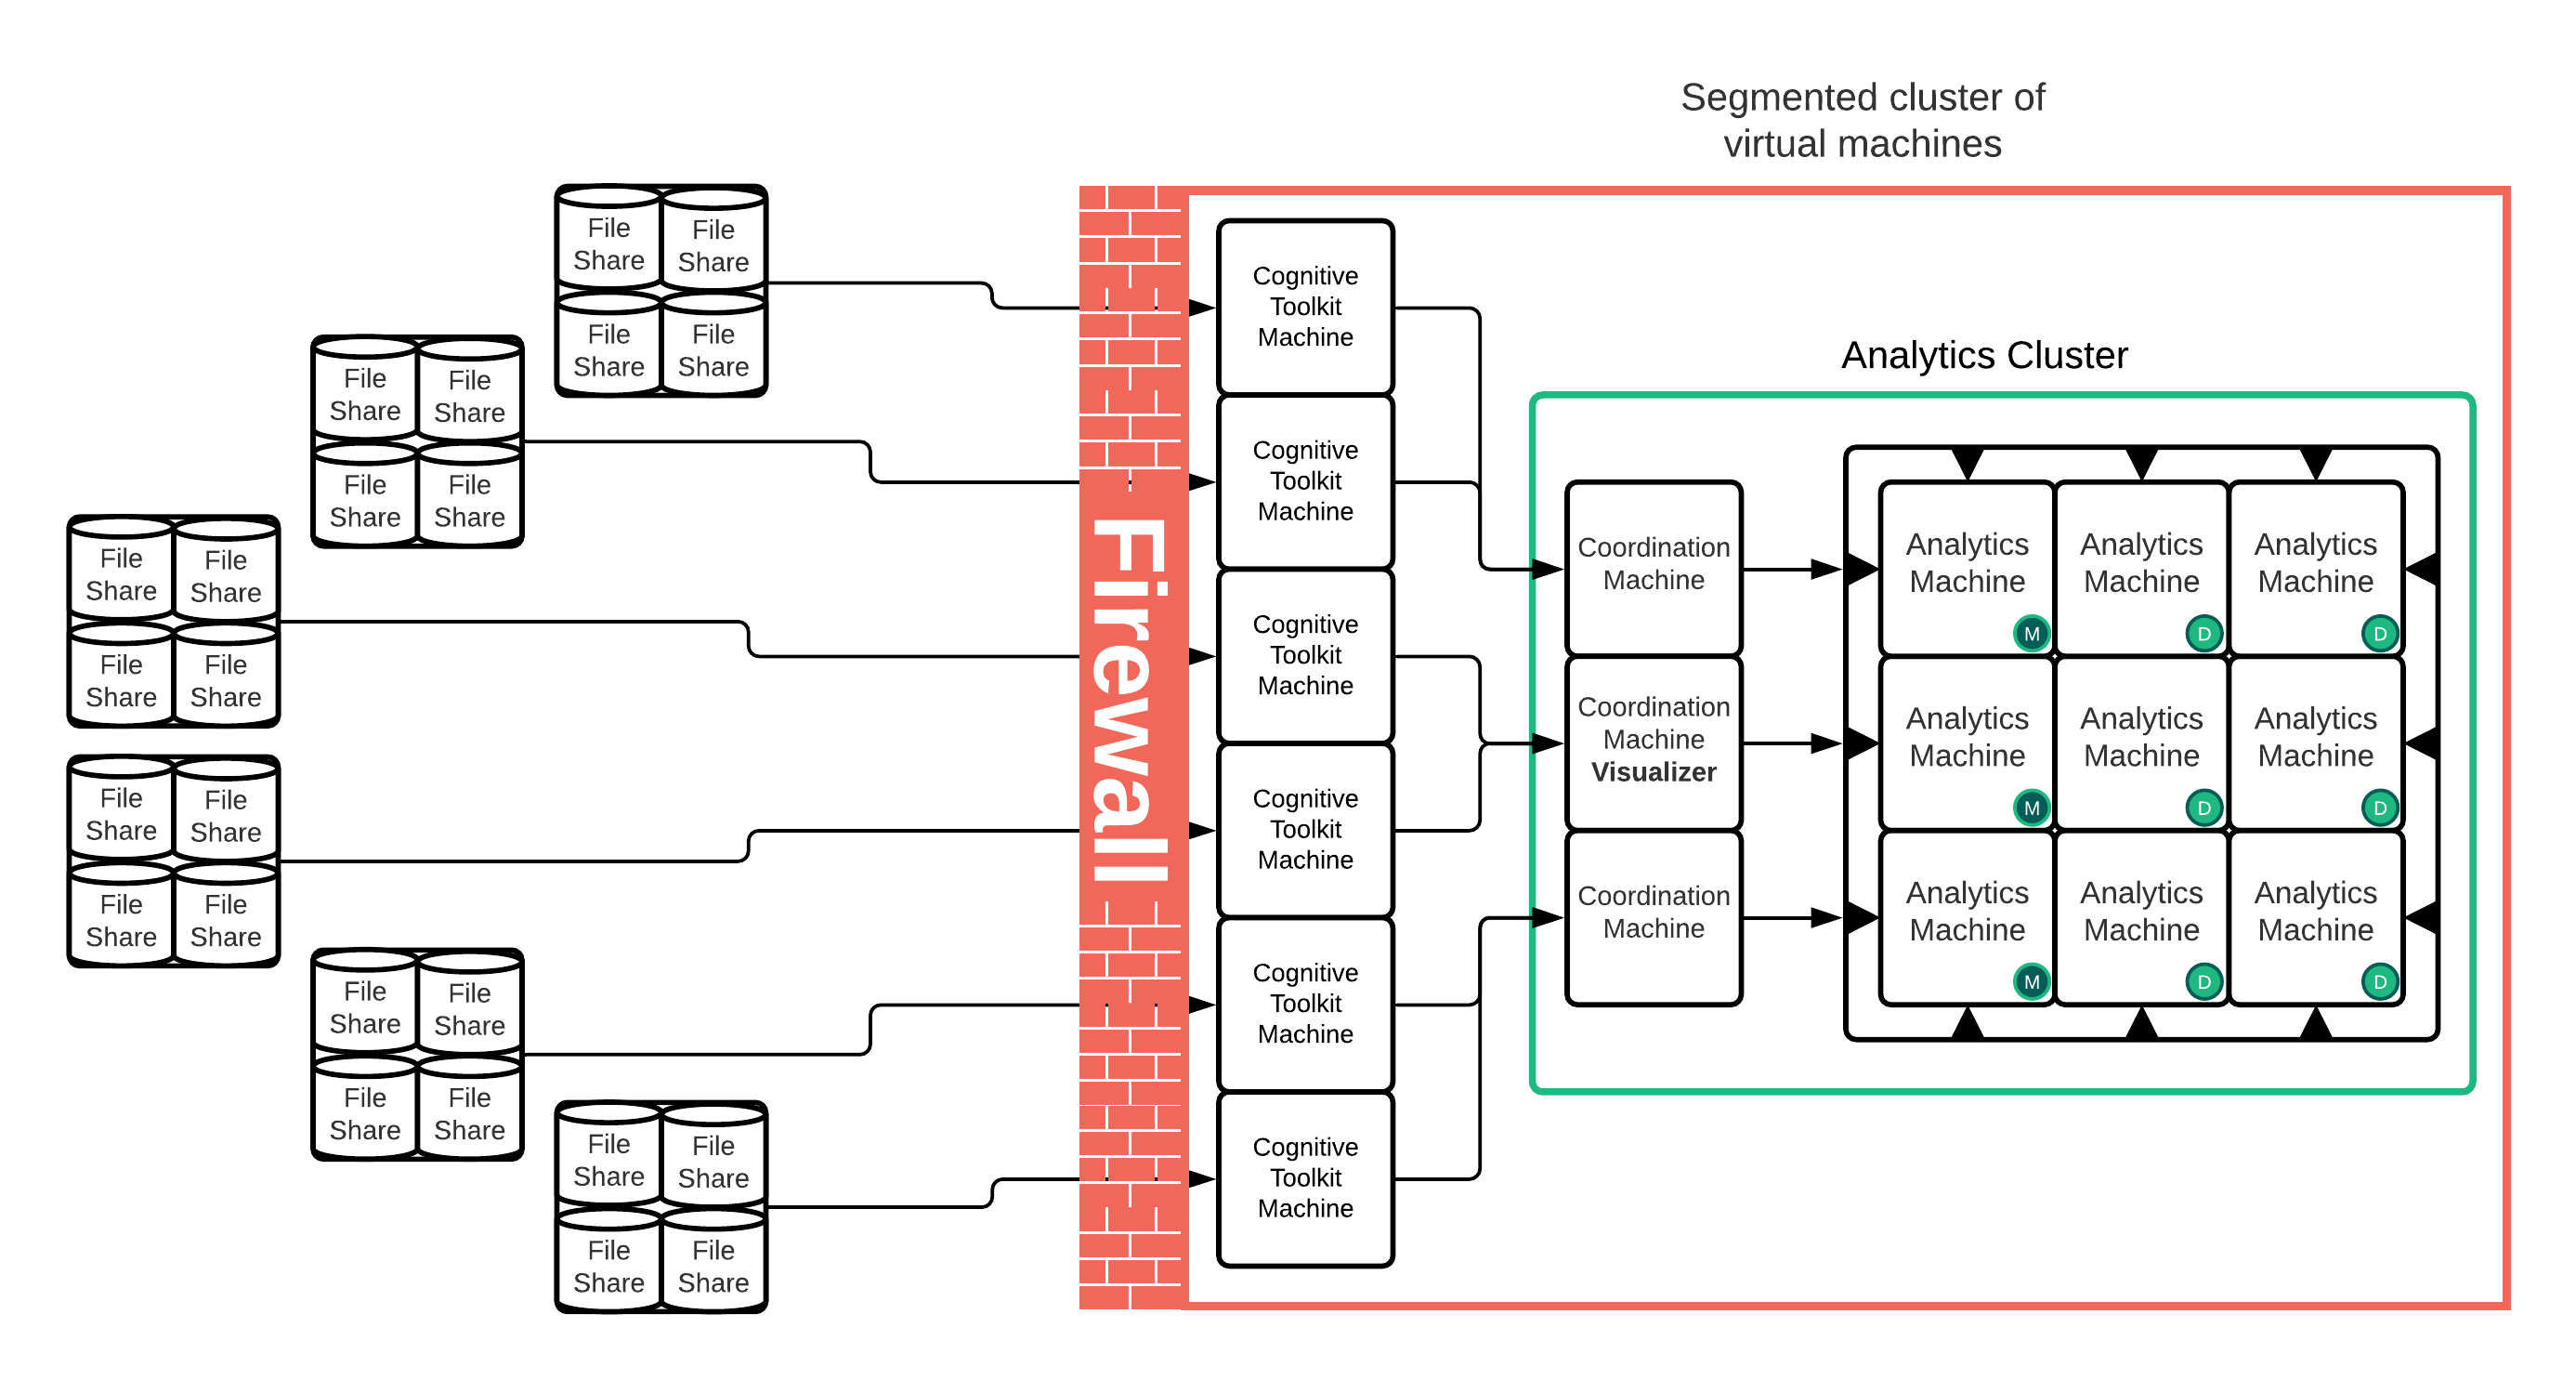 Image of system architecture showing the flow of data from file share to the cognitive toolkit to coordination machine to analytics machine